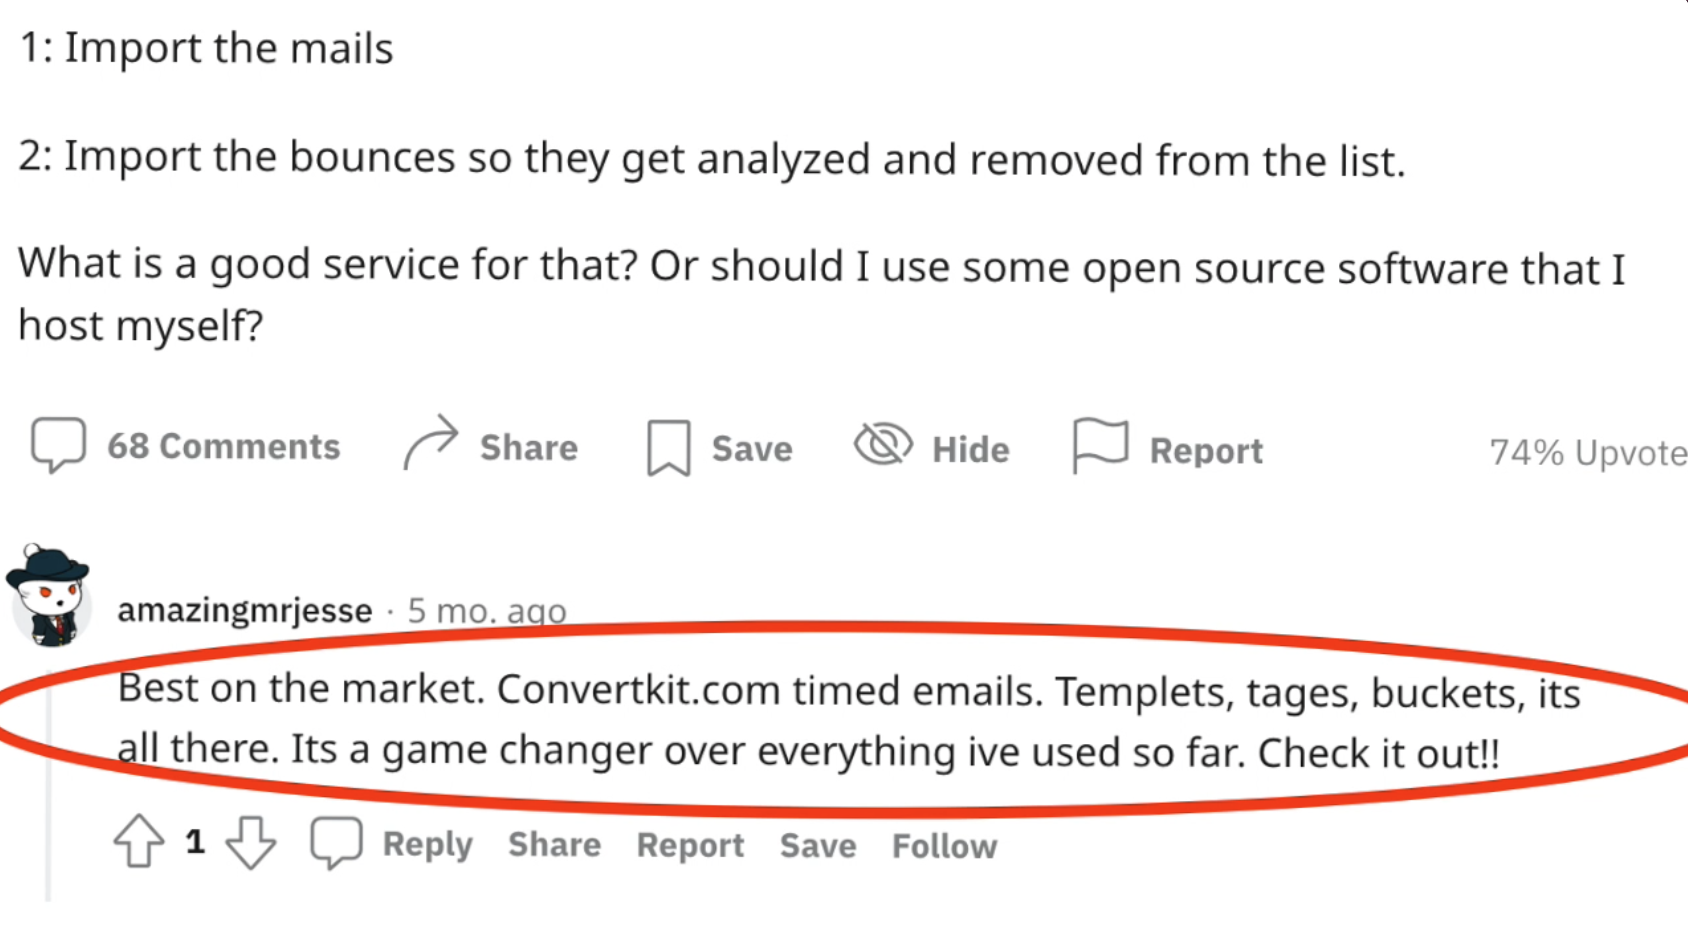 ConvertKit Review - What are others saying?